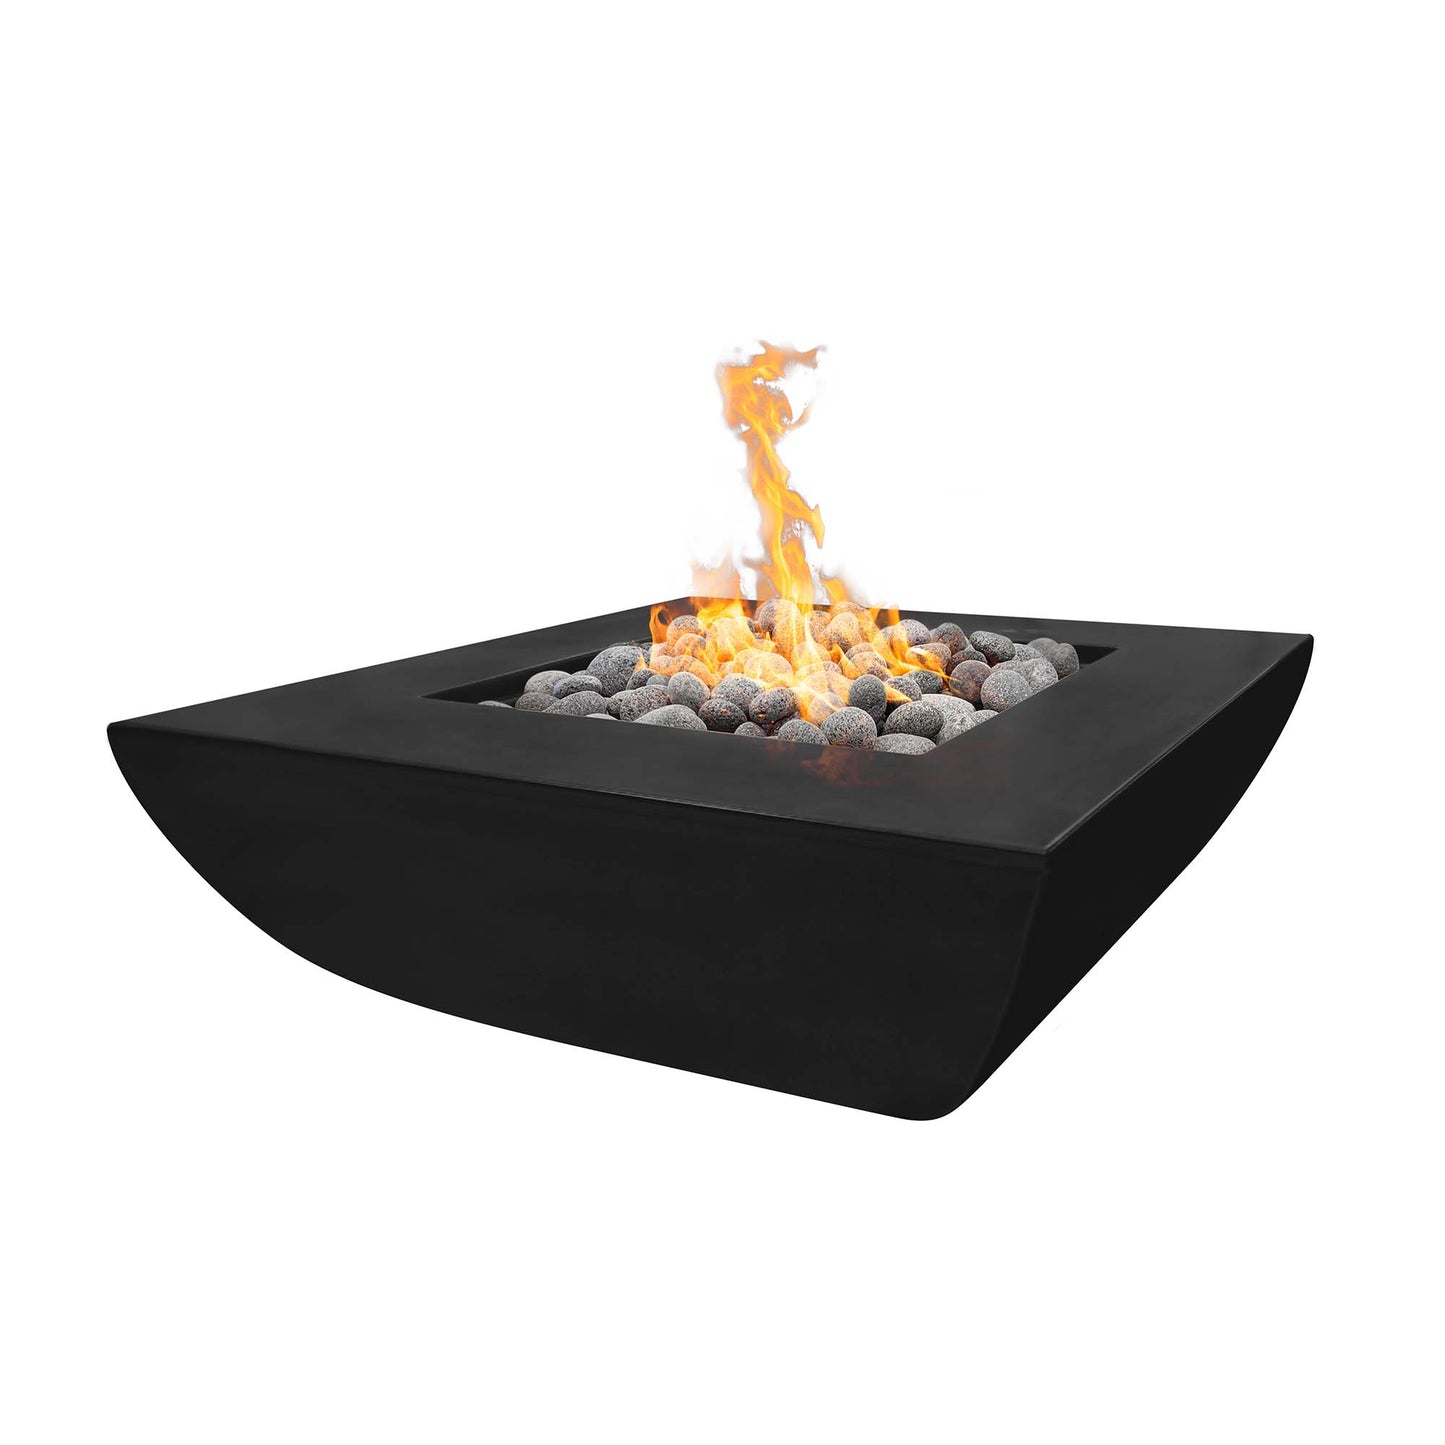 The Outdoor Plus Square Avalon 42" Natural Gray GFRC Concrete Liquid Propane Fire Pit with 110V Electronic Ignition